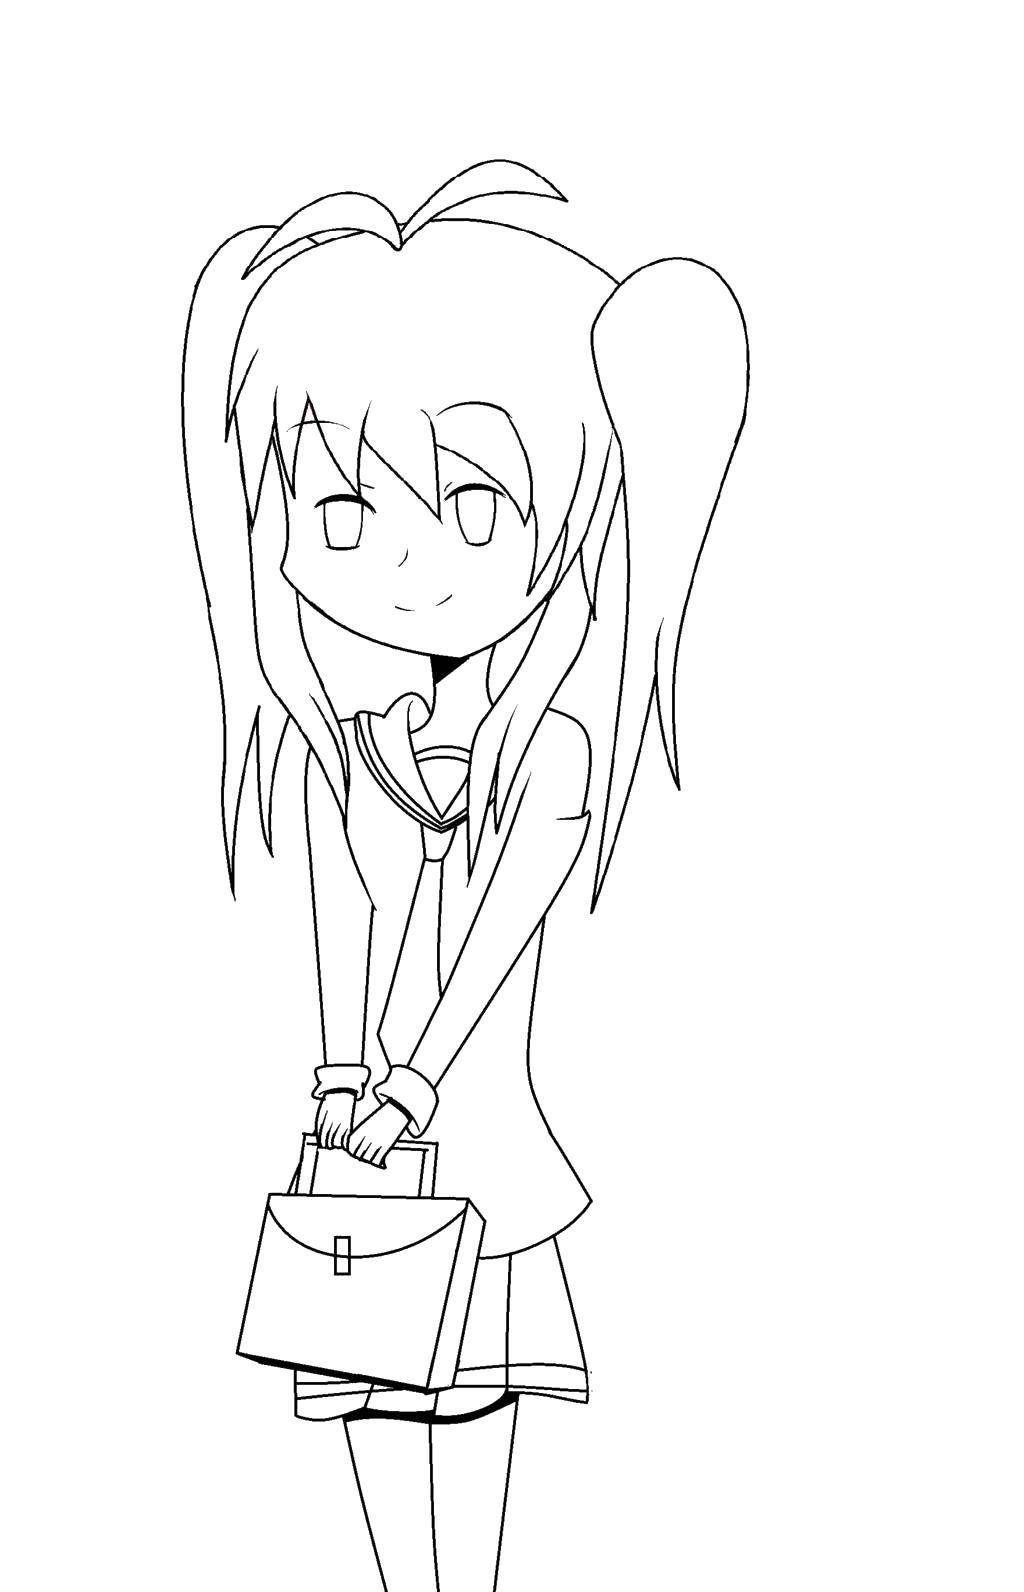 Coloring The girl from the anime. Category anime. Tags:  Anime girls.